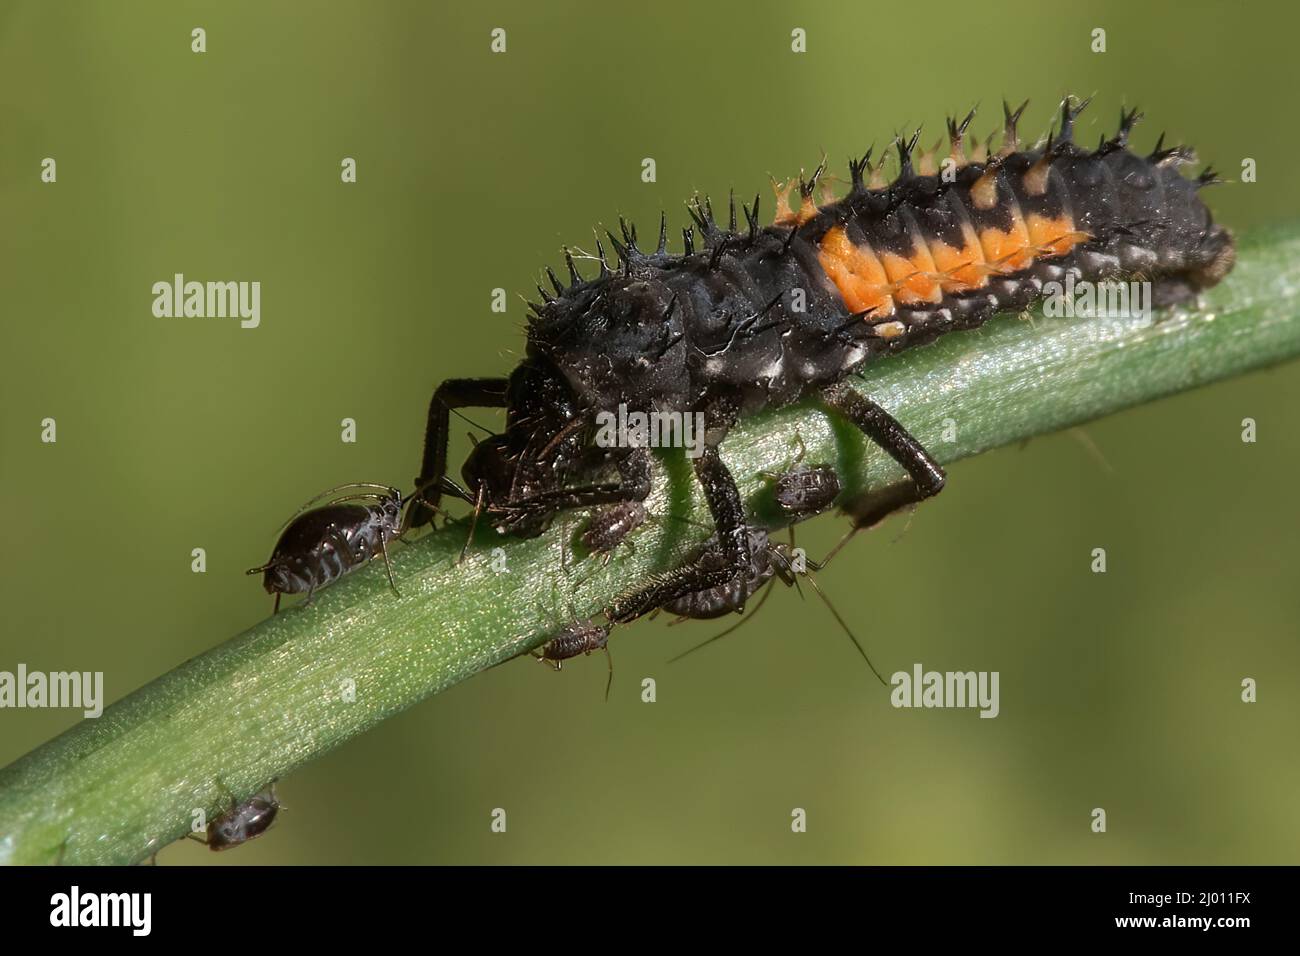 Closeup of Ladybug larvae on a plant in a garden Stock Photo